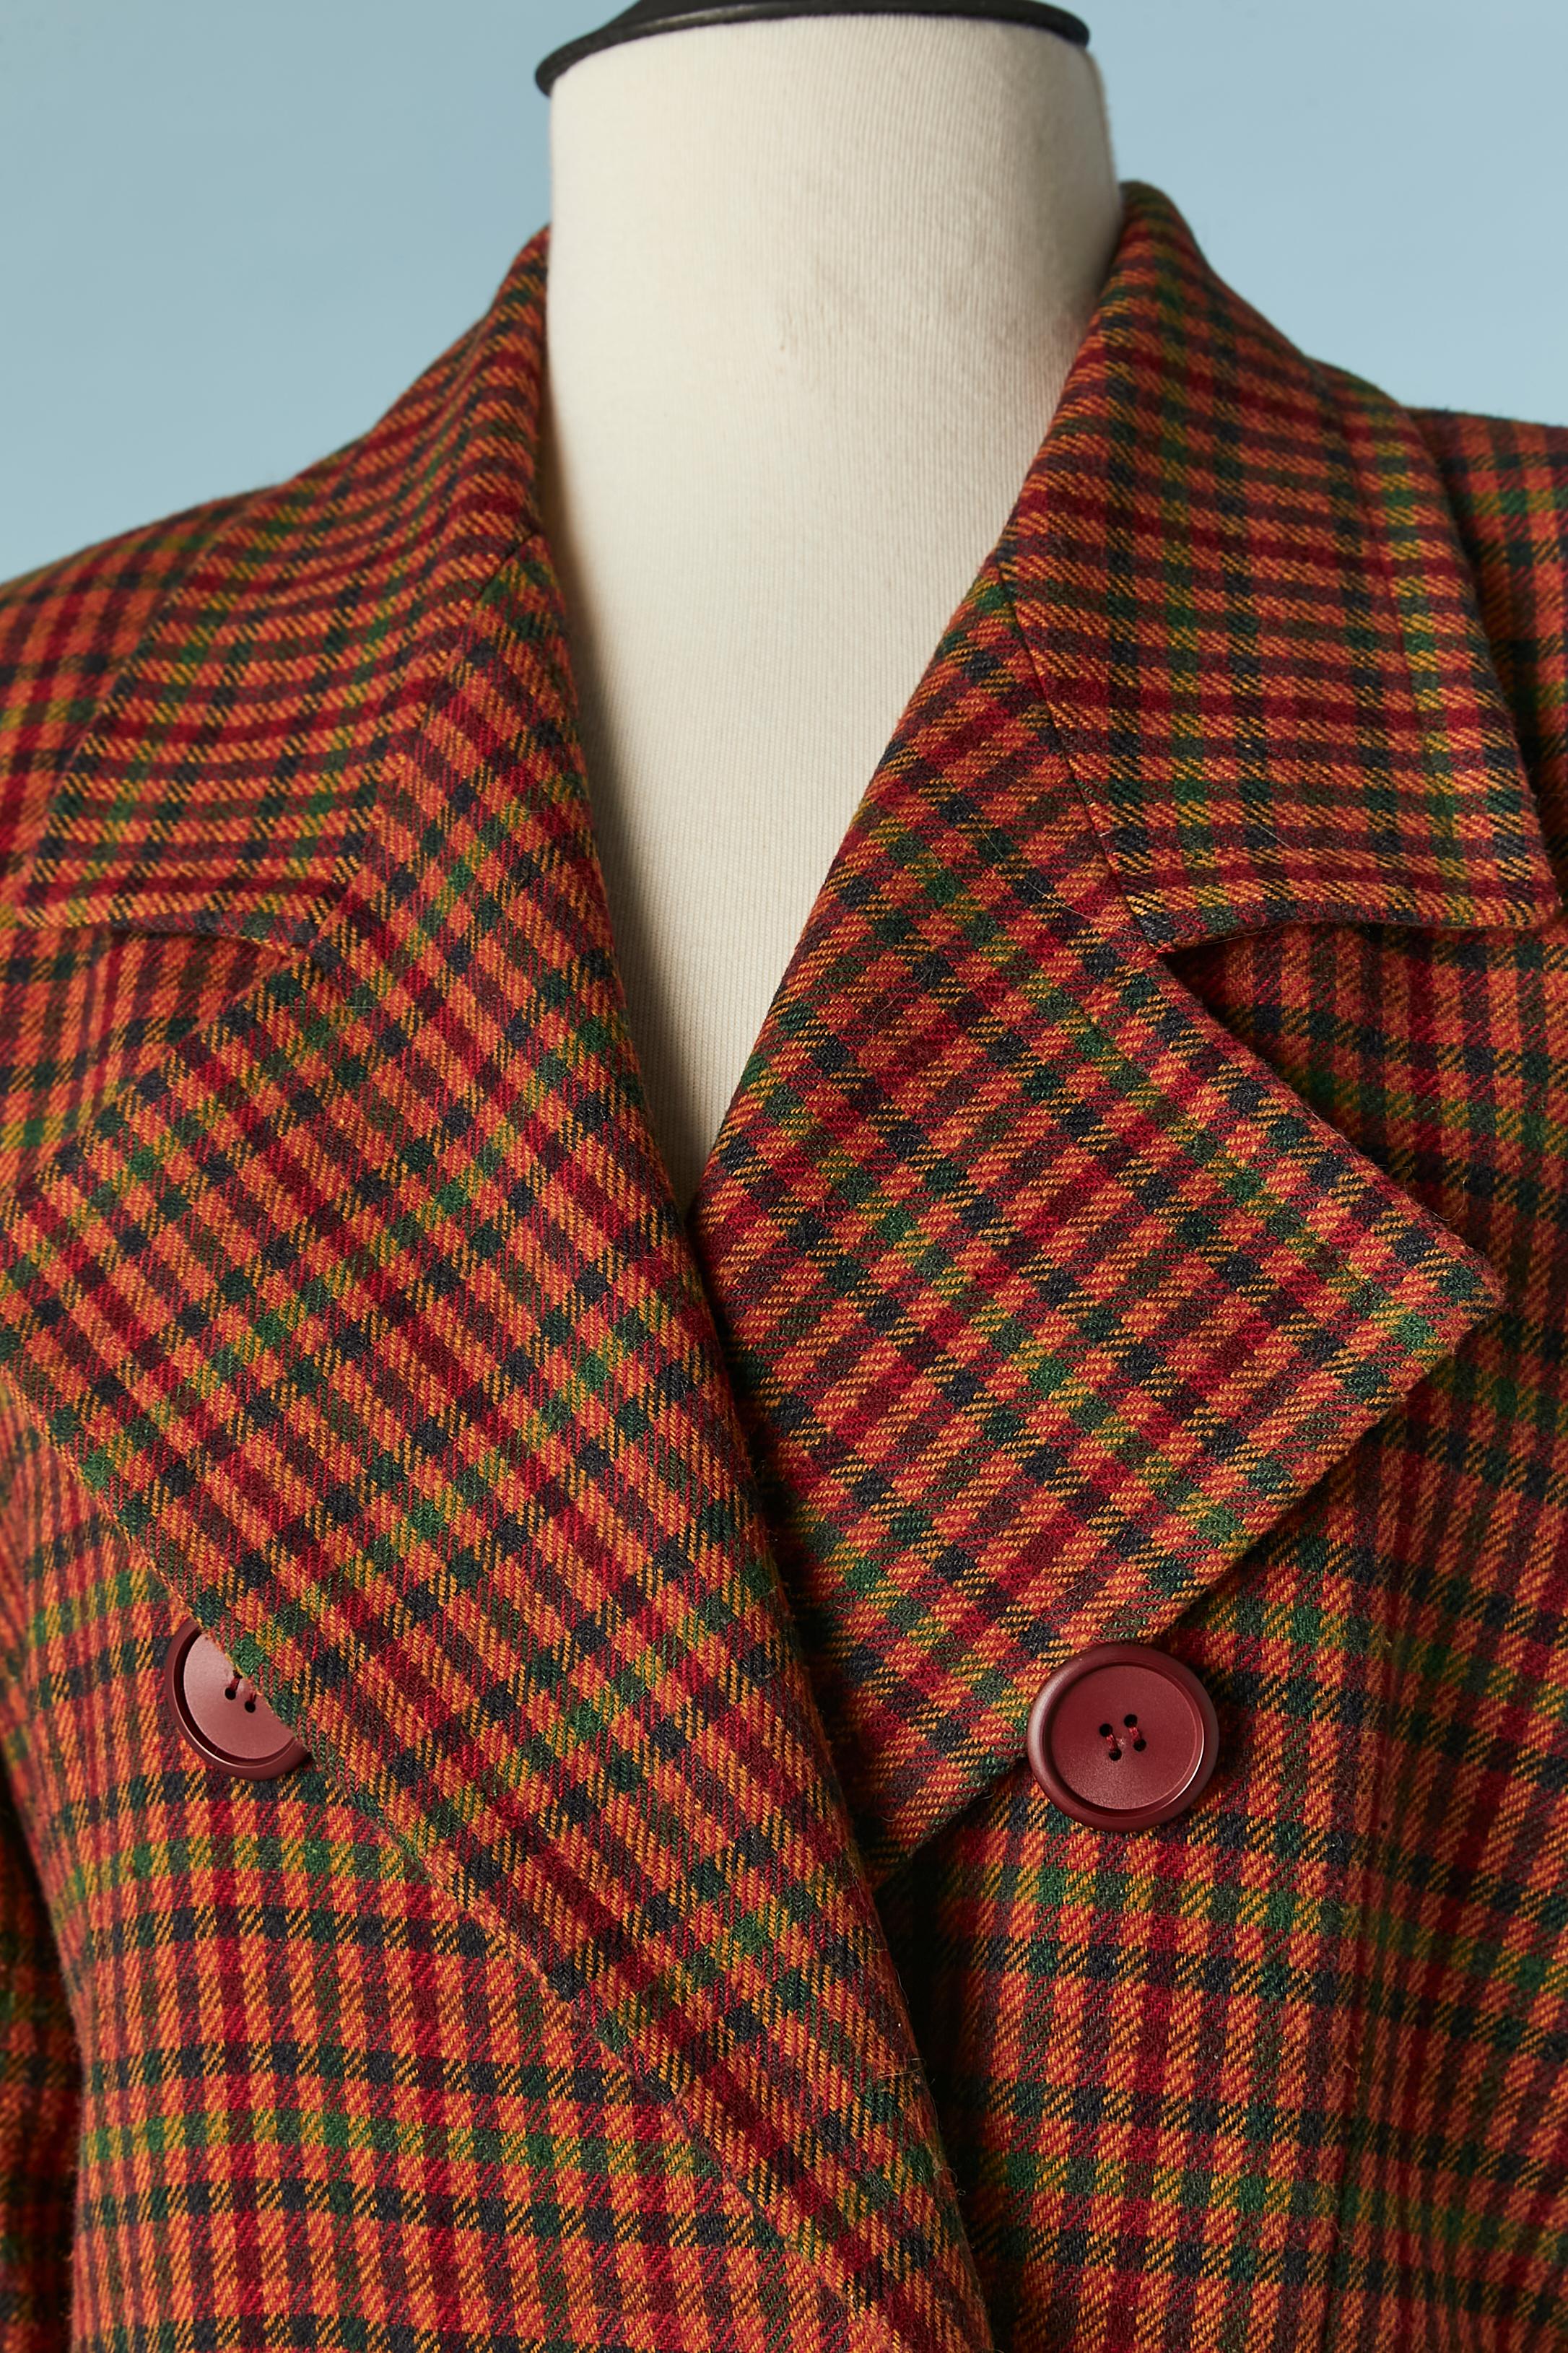 Wool check skirt-suit with double-breasted jacket. Shoulder-pads
SIZE 42 (Fr) L 